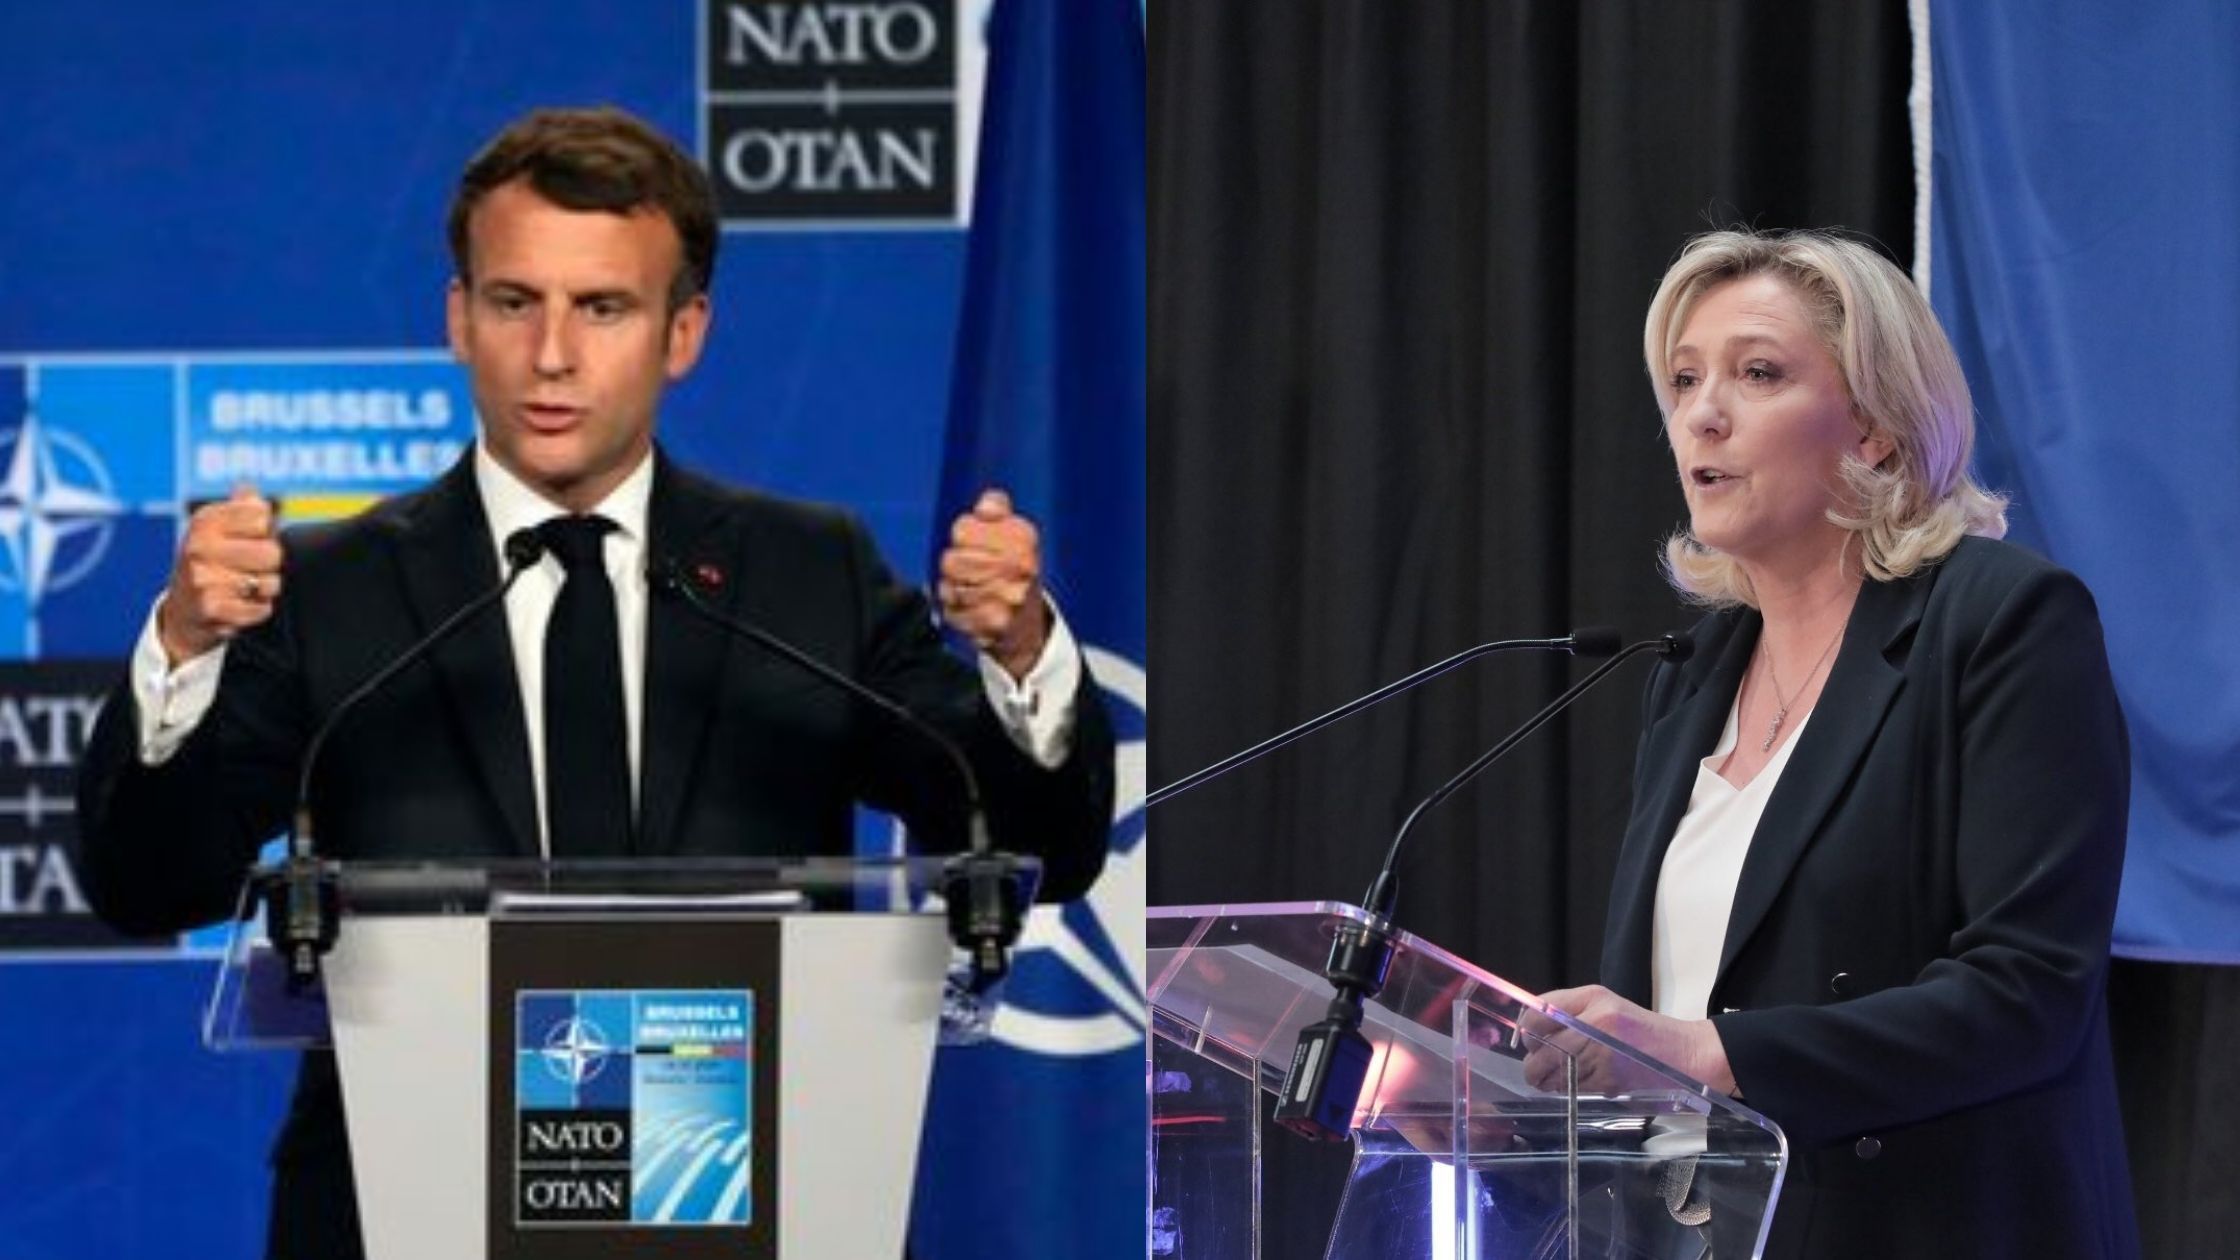 Emmanuel Macron and Marine Le Pen face new test in French regional vote